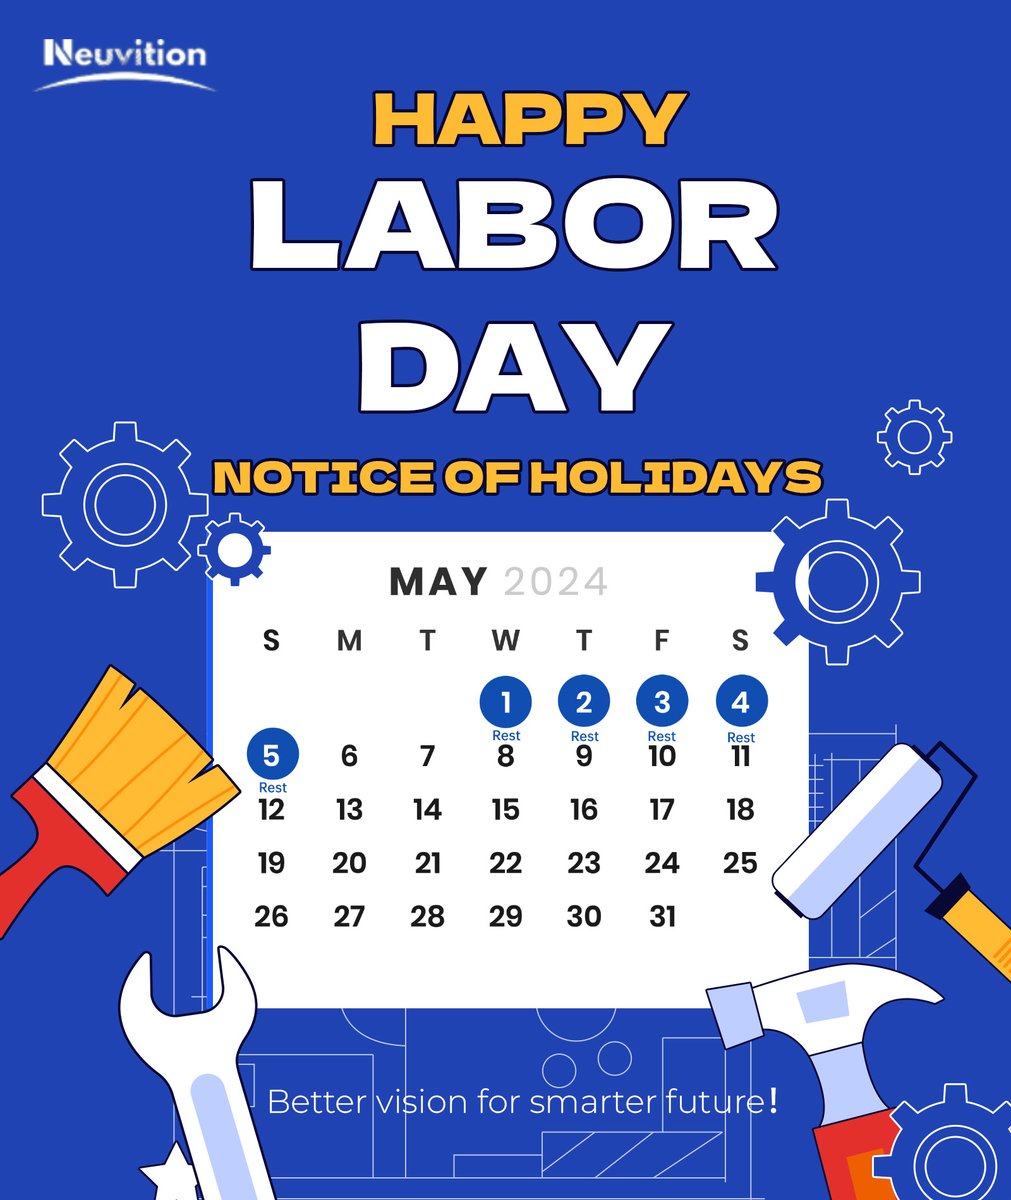 Just a friendly reminder that the #Neuvition team will be taking a break from May 1st to May 5th for Labor Day. Take this opportunity to recharge and enjoy some quality time off! 
#LaborDay